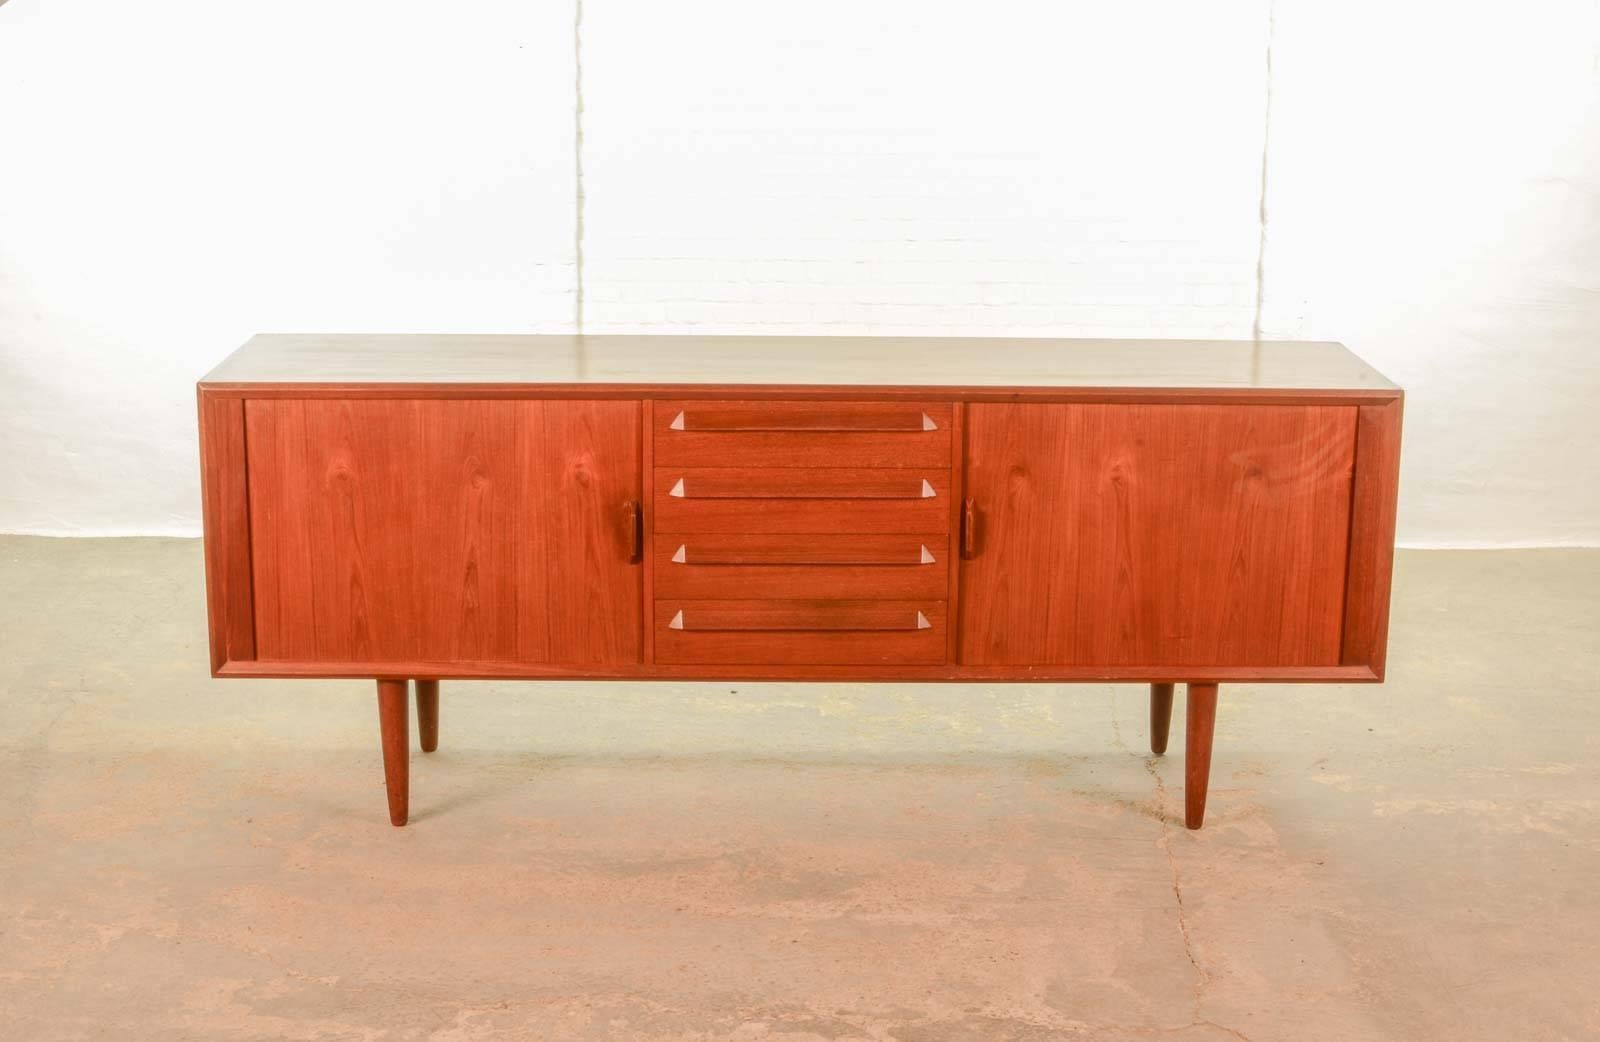 Danish teak credenza designed by Ib Kofod-Larsen in the 1960s for Faarup Mobelfabrik. Teak with rich dimensional detailing. Tambour doors on the left and right glide open to adjustable shelves. Furthermore it contains four drawers in the middle with